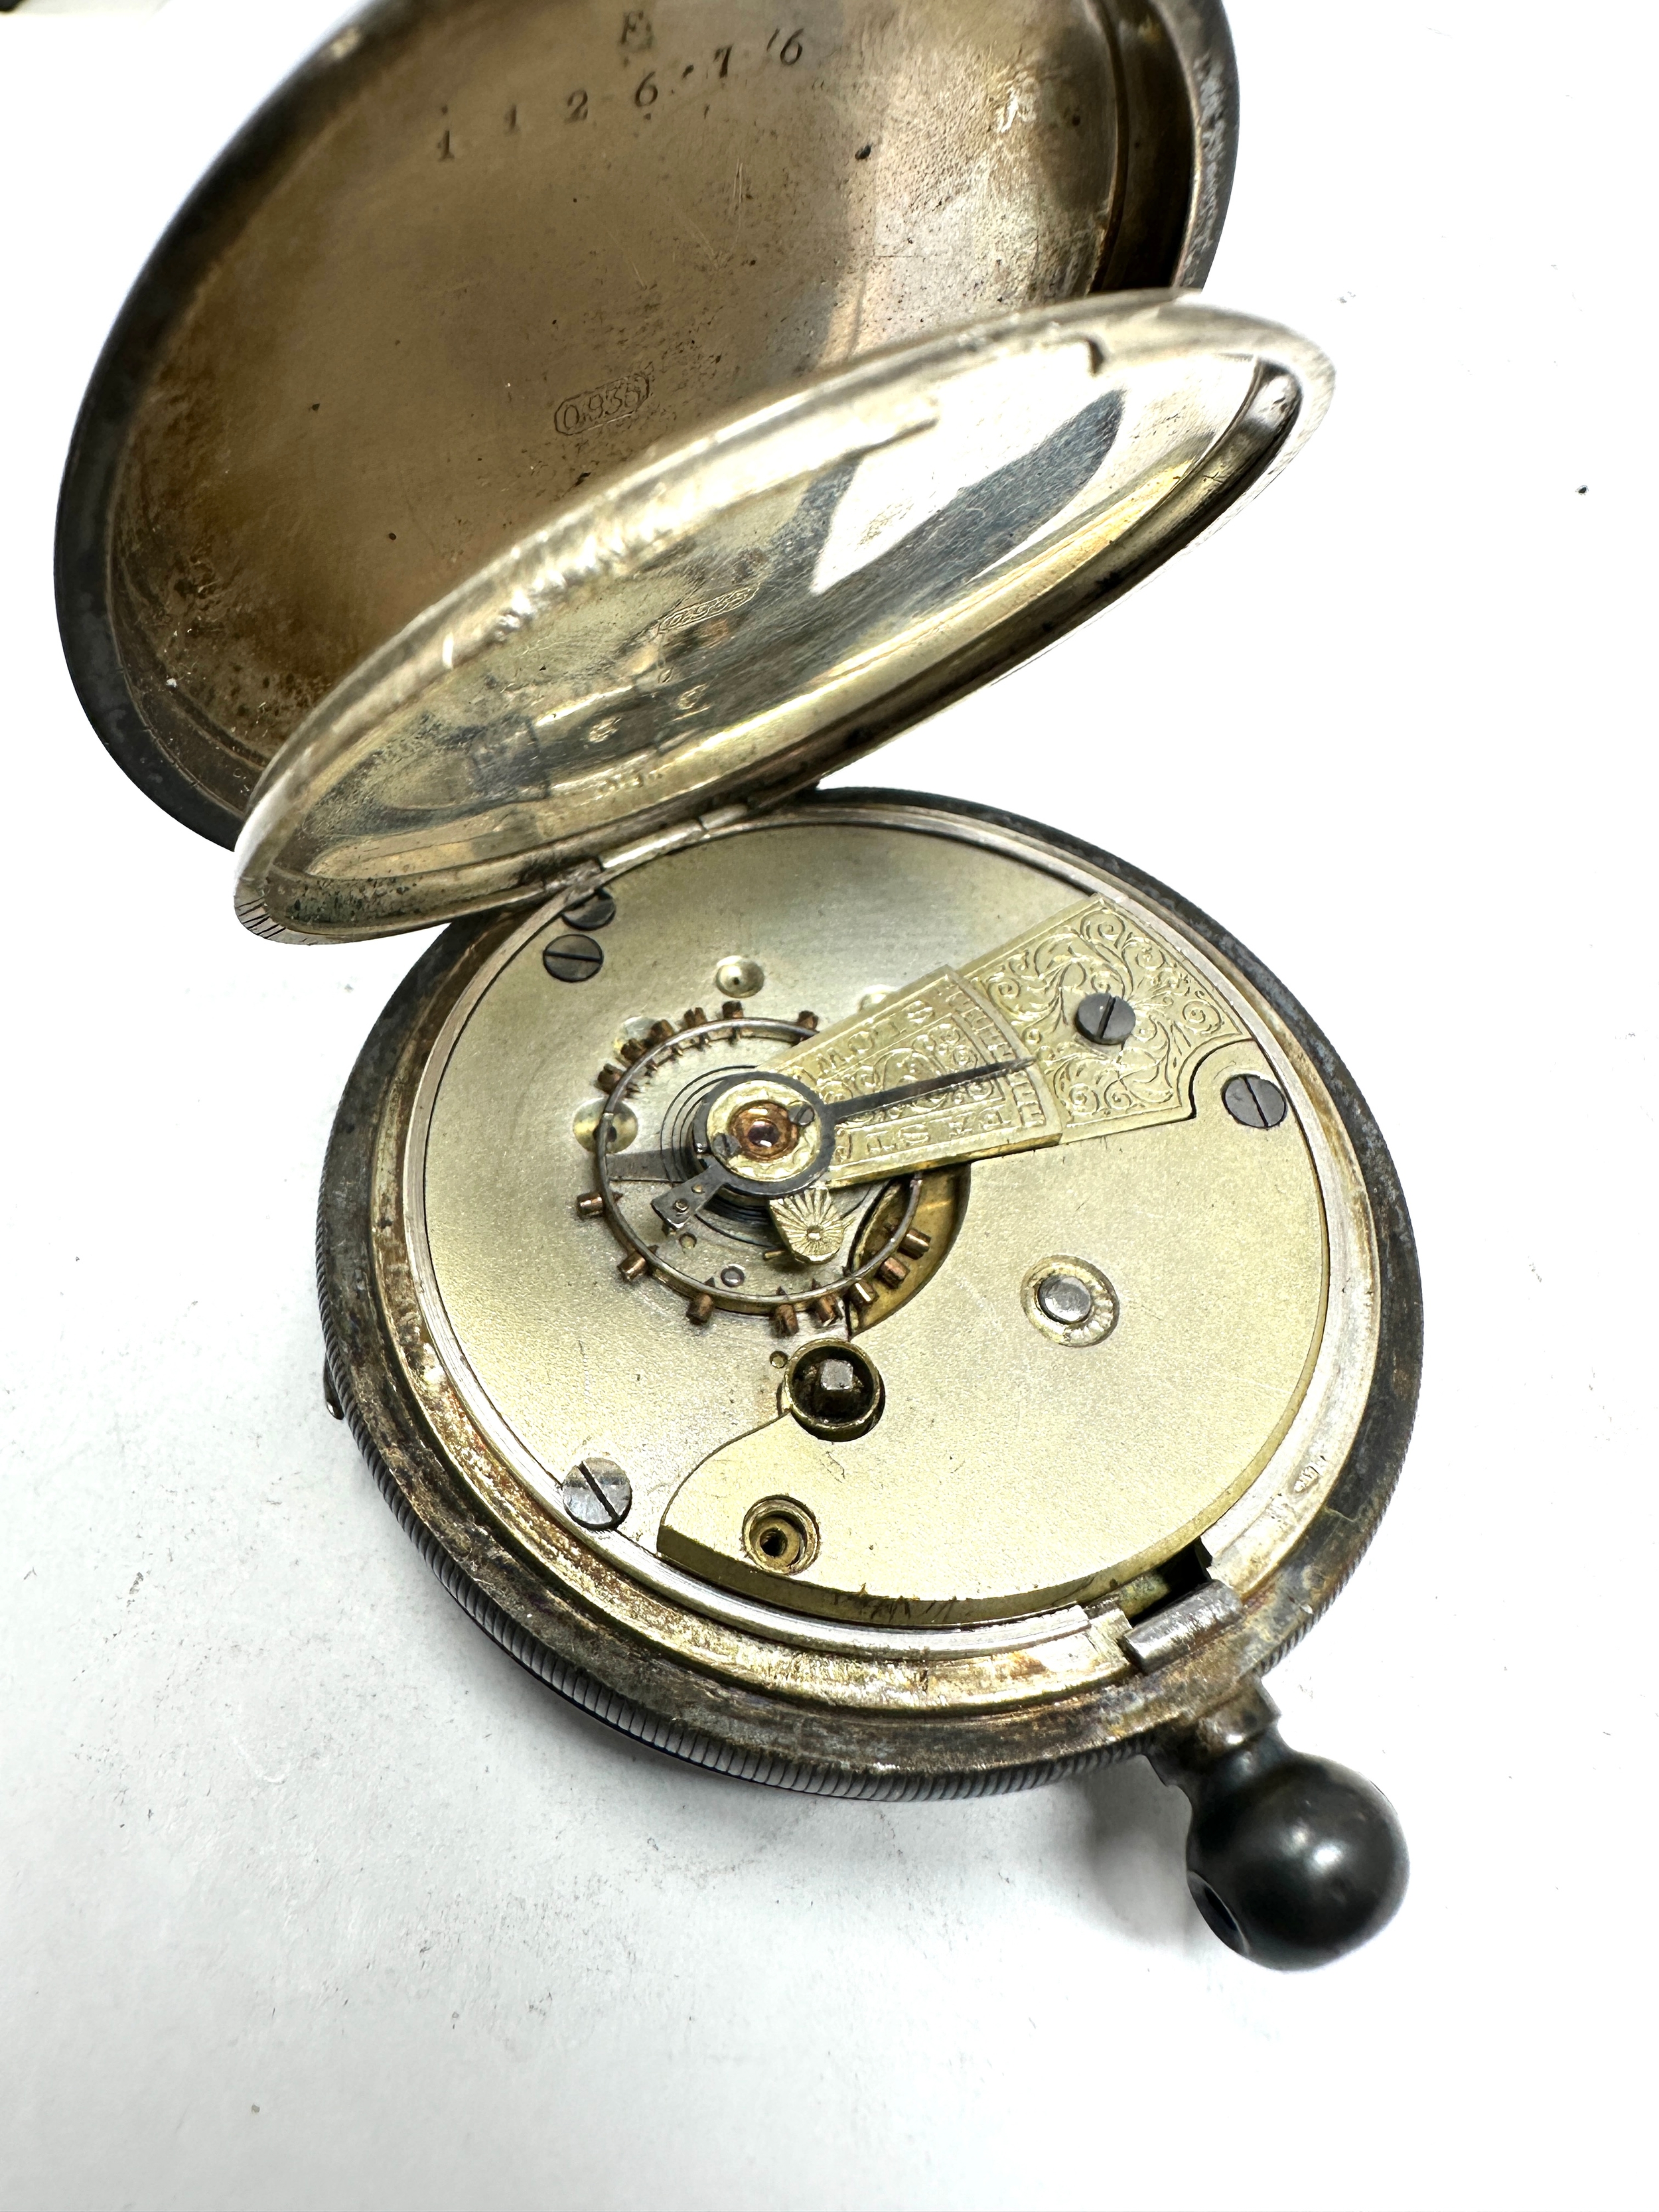 Antique silver open face pocket watch the watch is ticking missing loop and second hand - Image 3 of 3